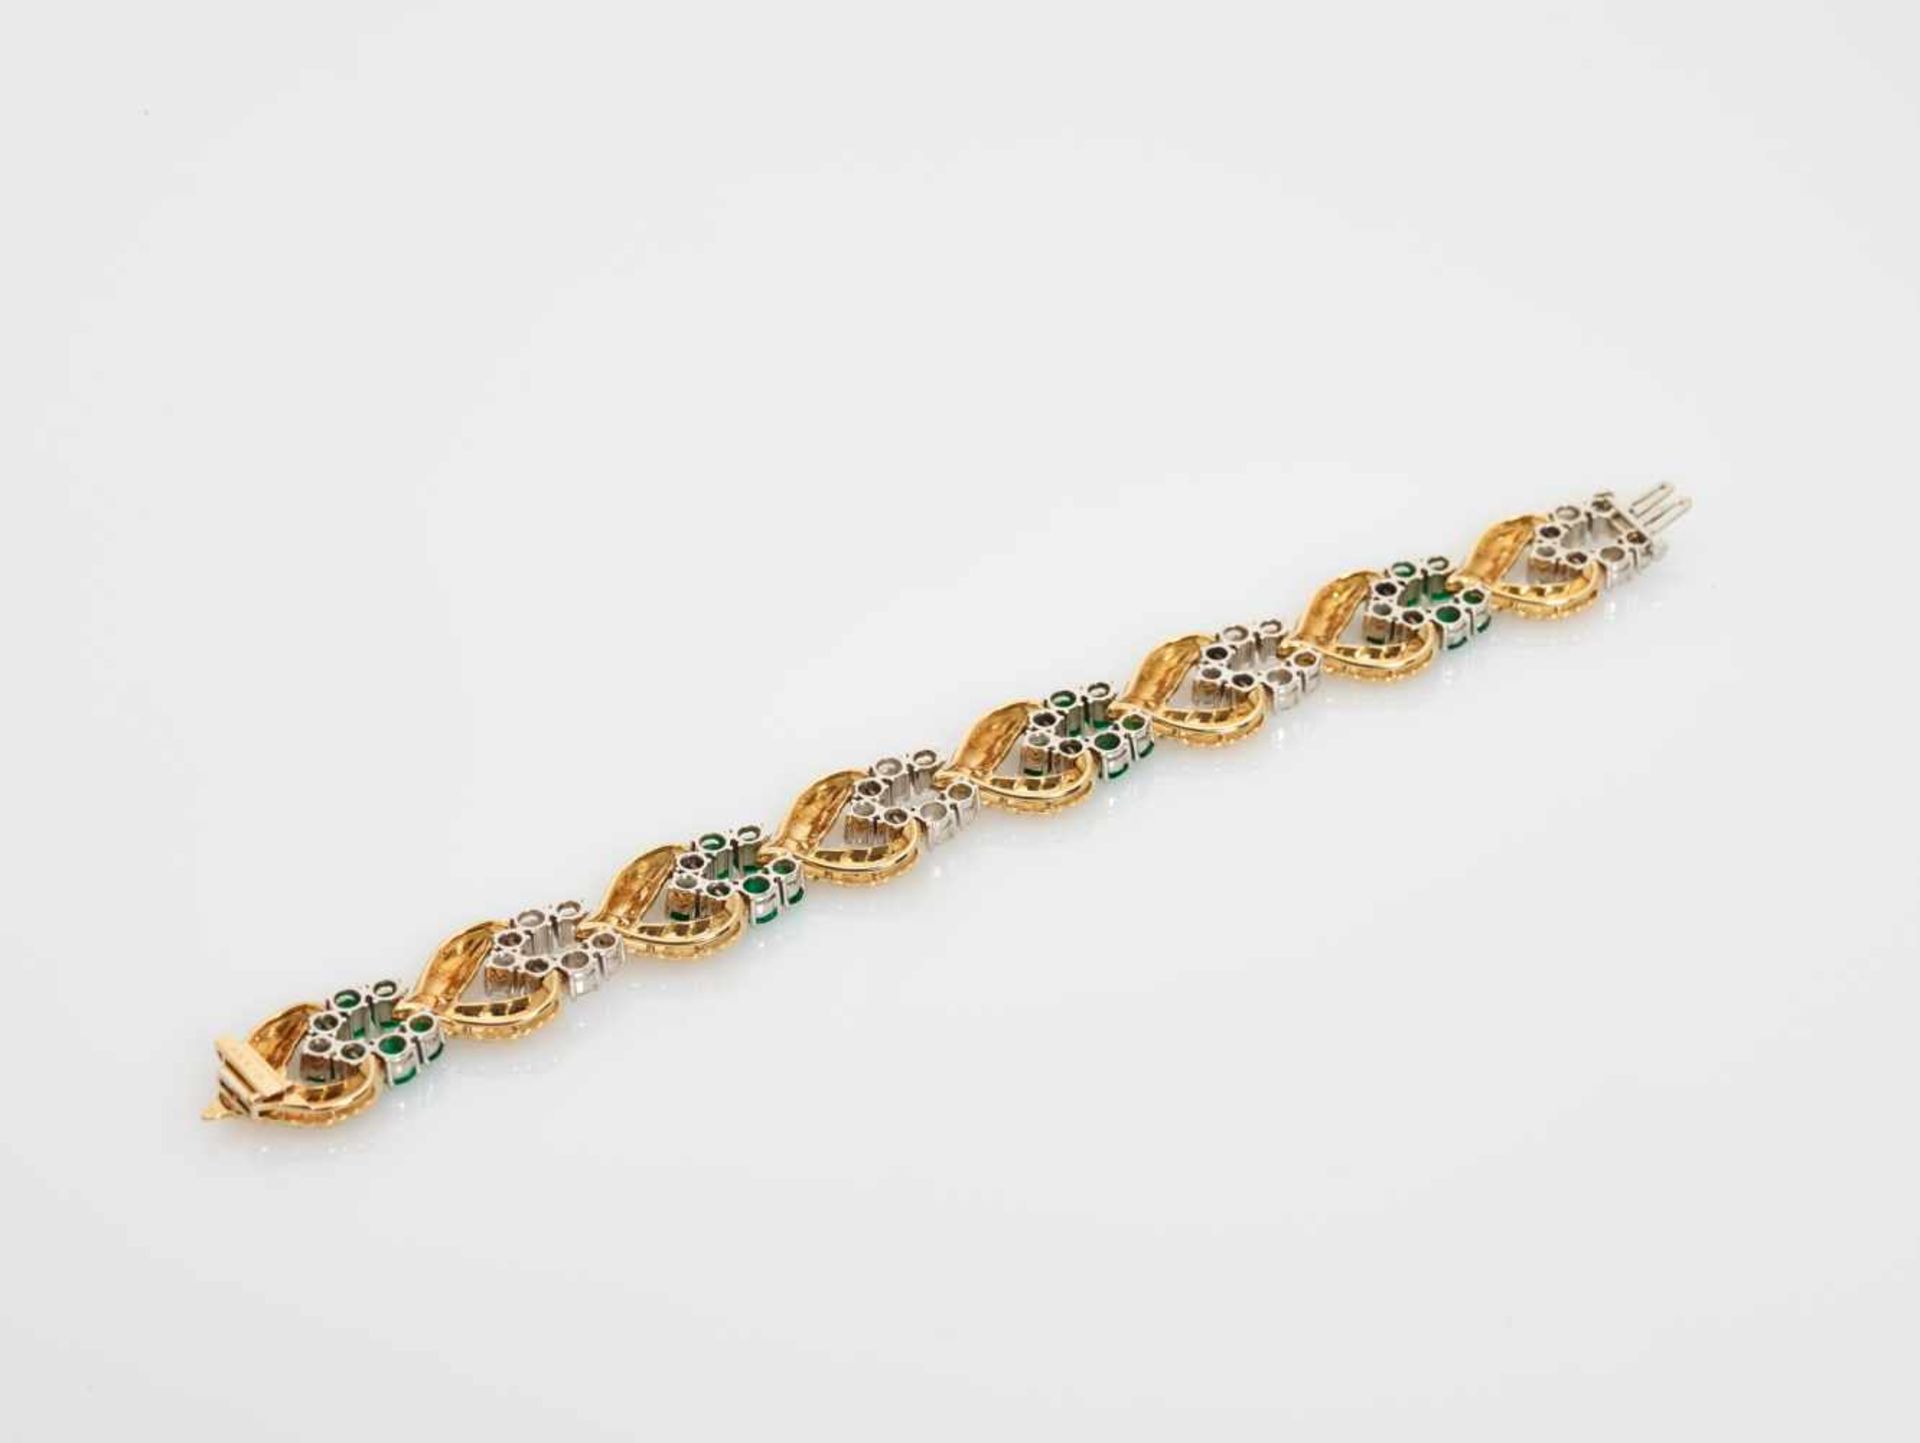 A VAN CLEEF & ARPELS GOLD BRACELET WITH 11 CARATS OF EMERALDS AND DIAMONDSNew Yorkca. 1940, - Image 6 of 10